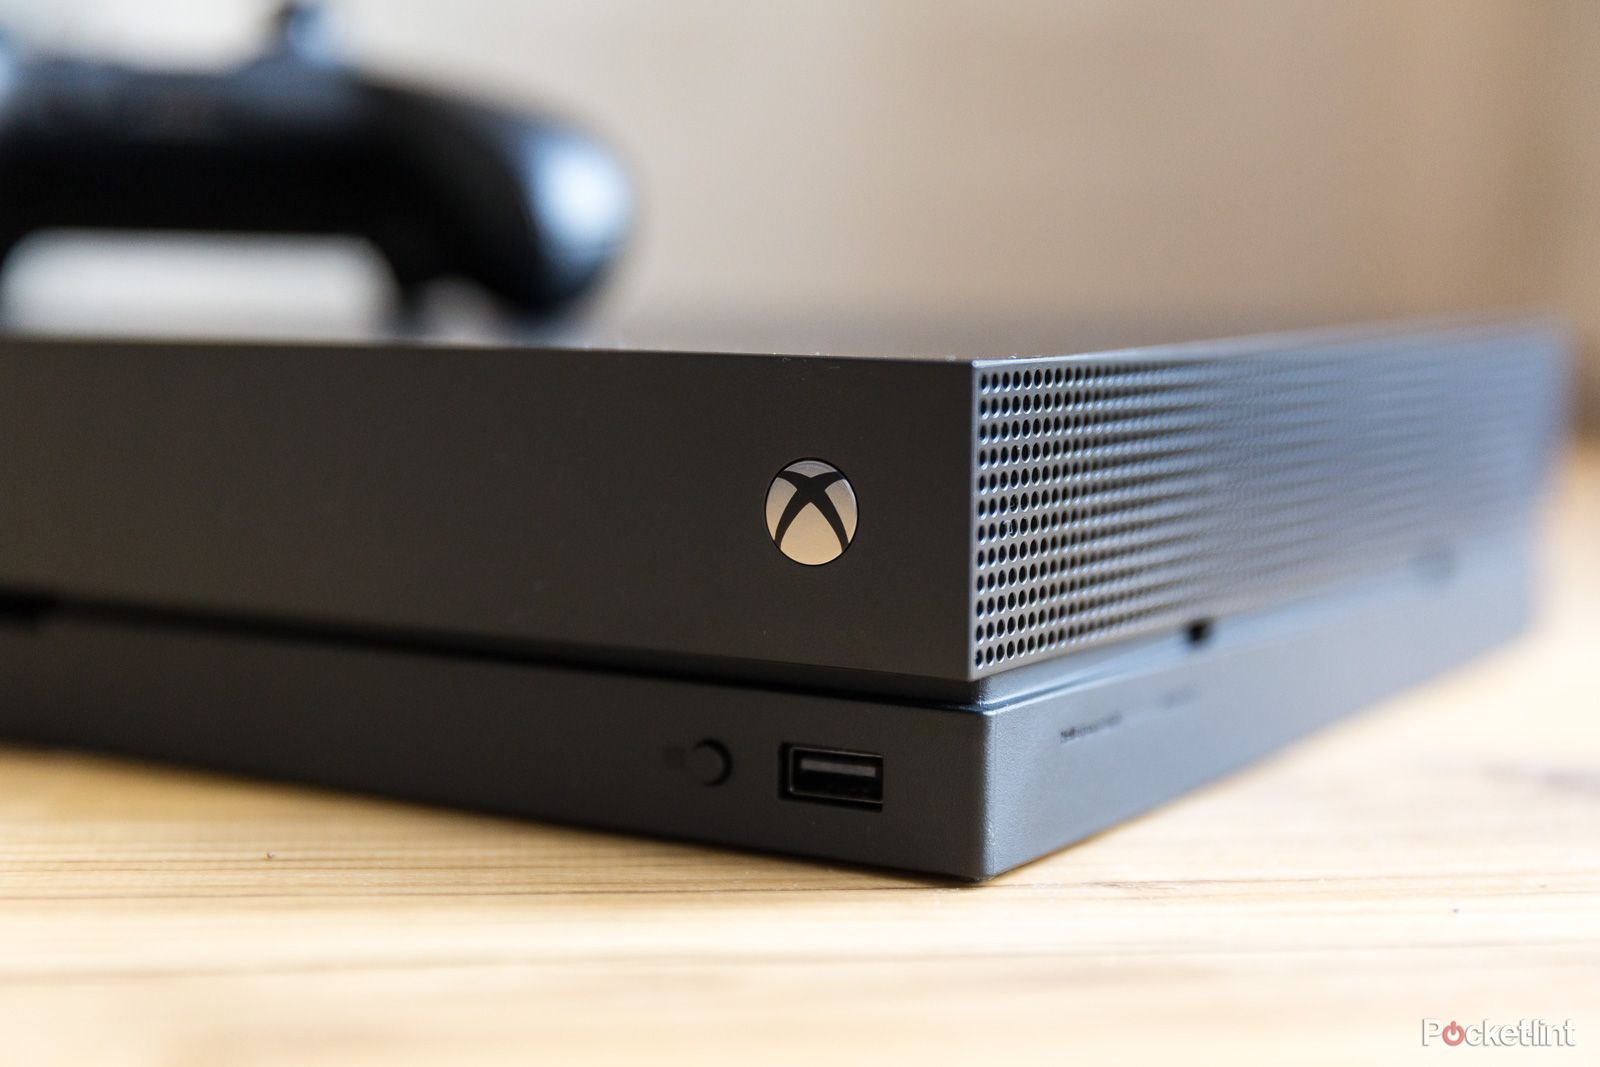 Some Xbox Insiders are getting an early trial of DTSX spatial headphone audio on Xbox One image 1